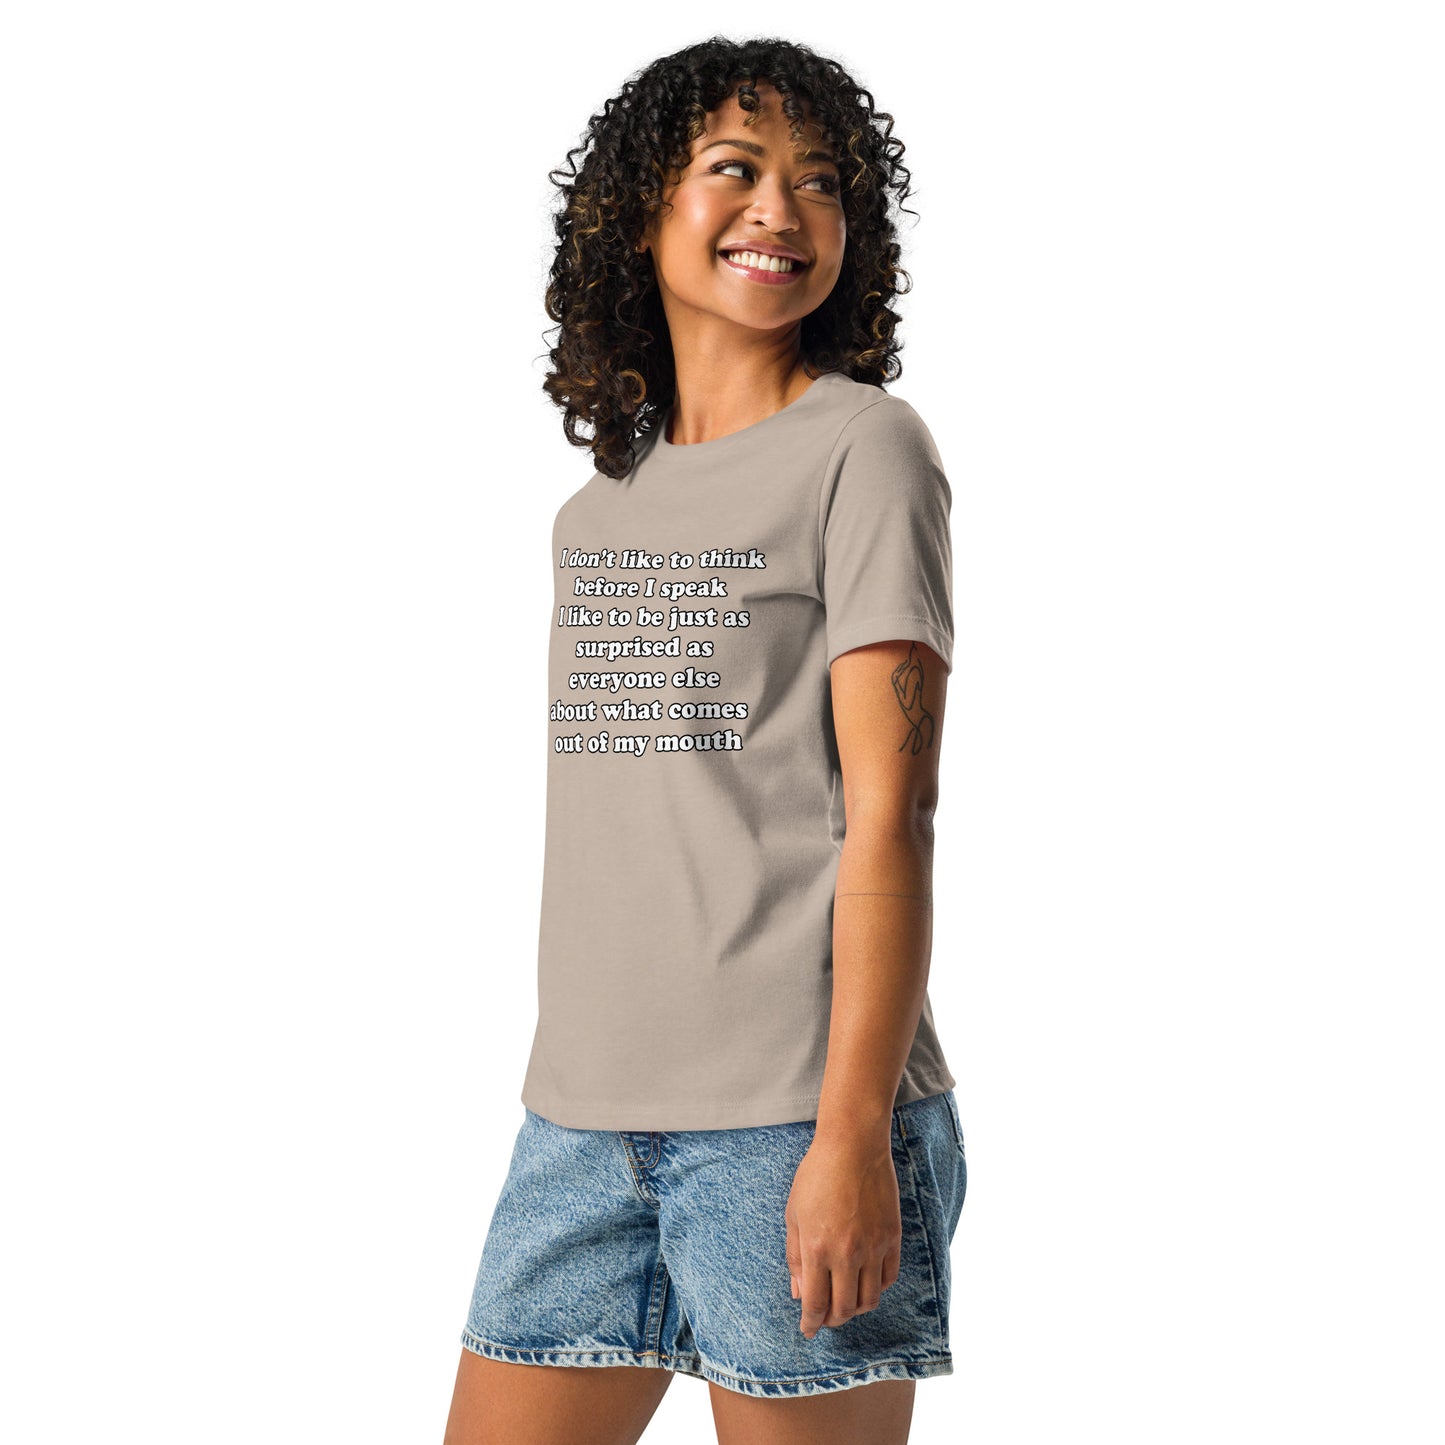 Woman with stone t-shirt with text “I don't think before I speak Just as serprised as everyone about what comes out of my mouth"